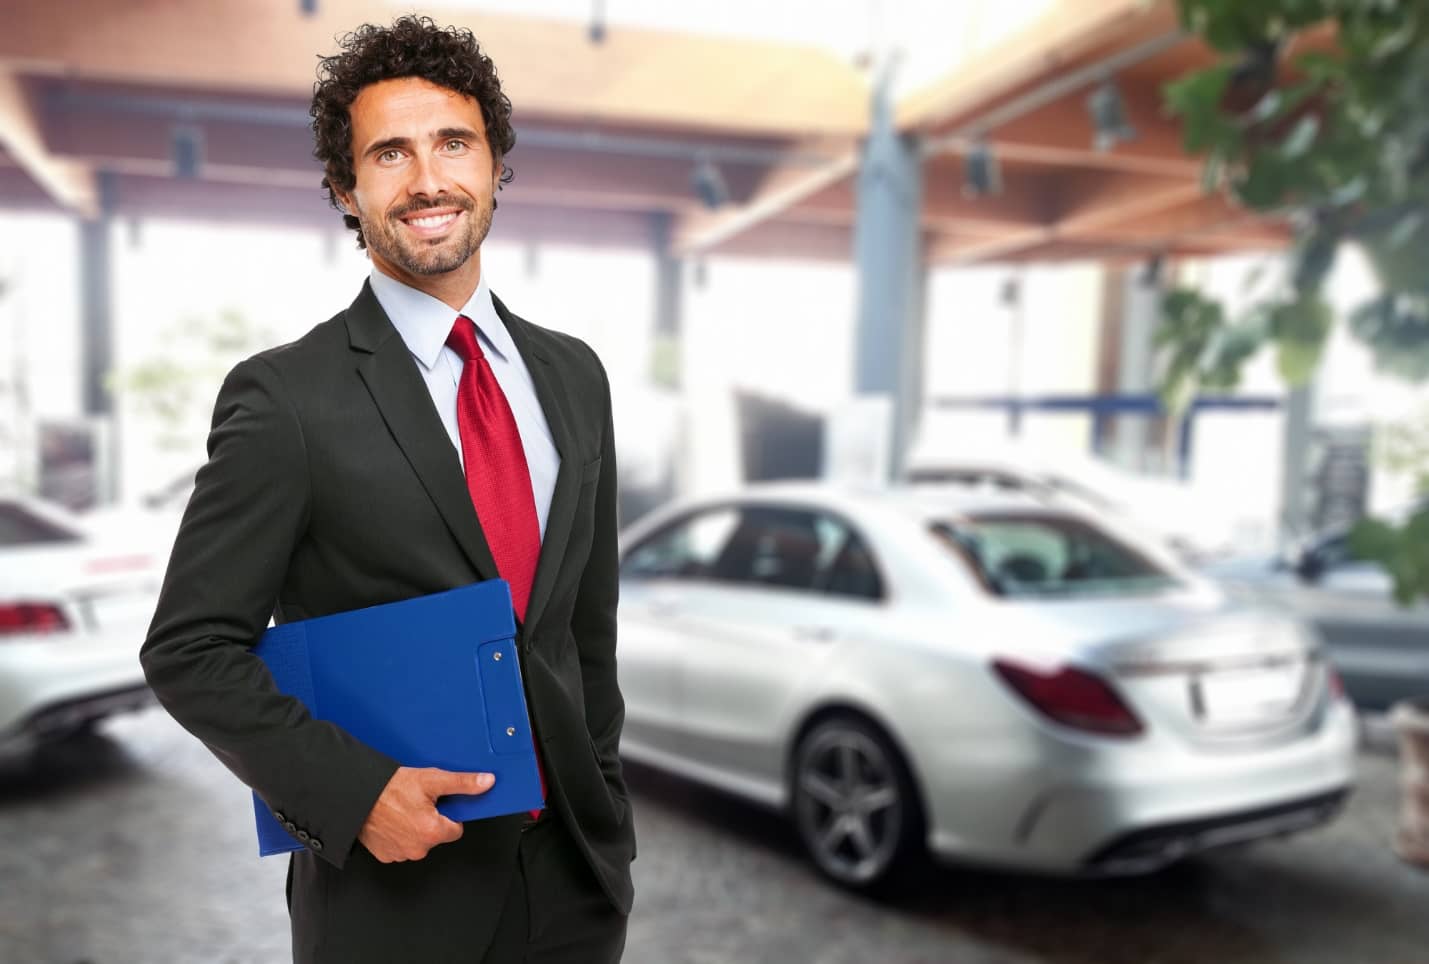 Benefits of Working as a Car Salesman